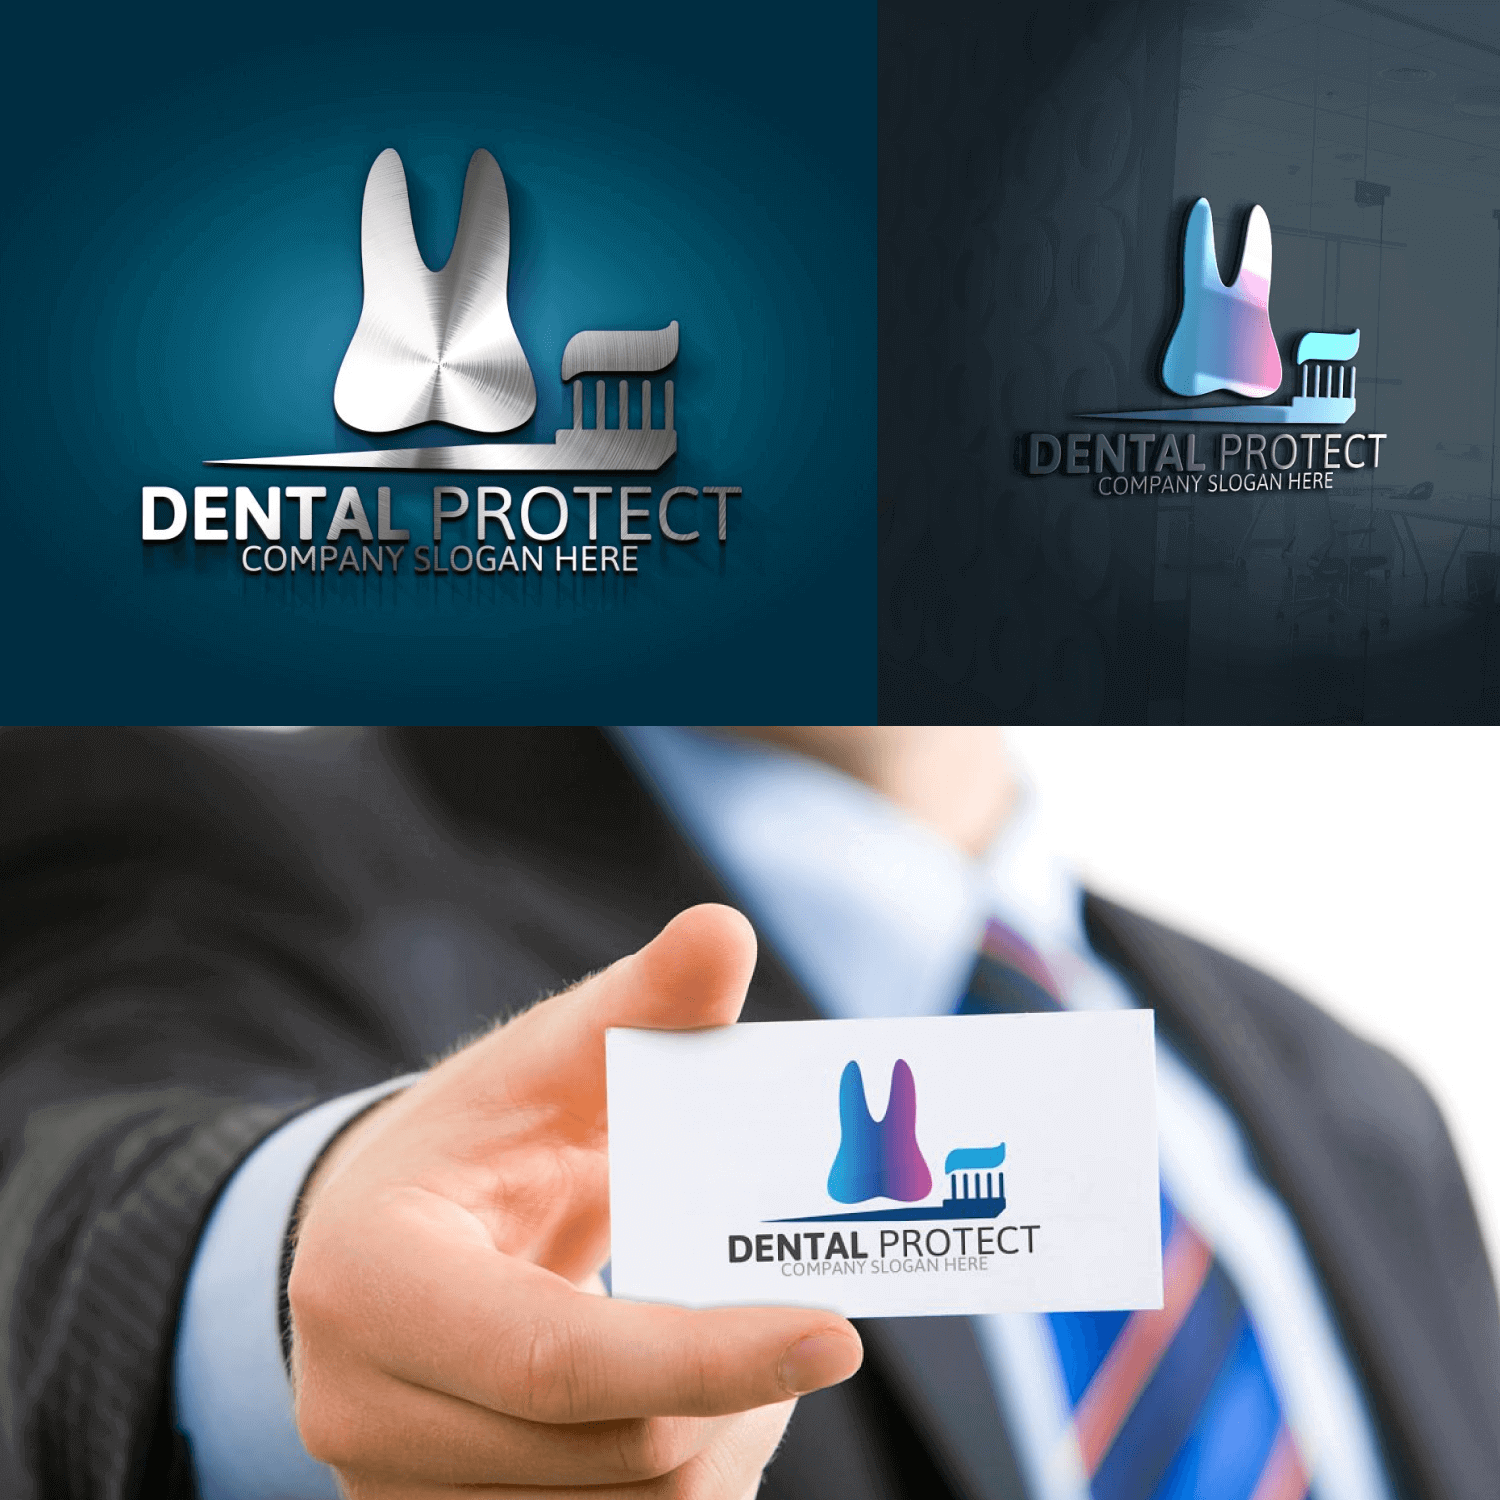 Dental Protect on White, Blue and Black Background.